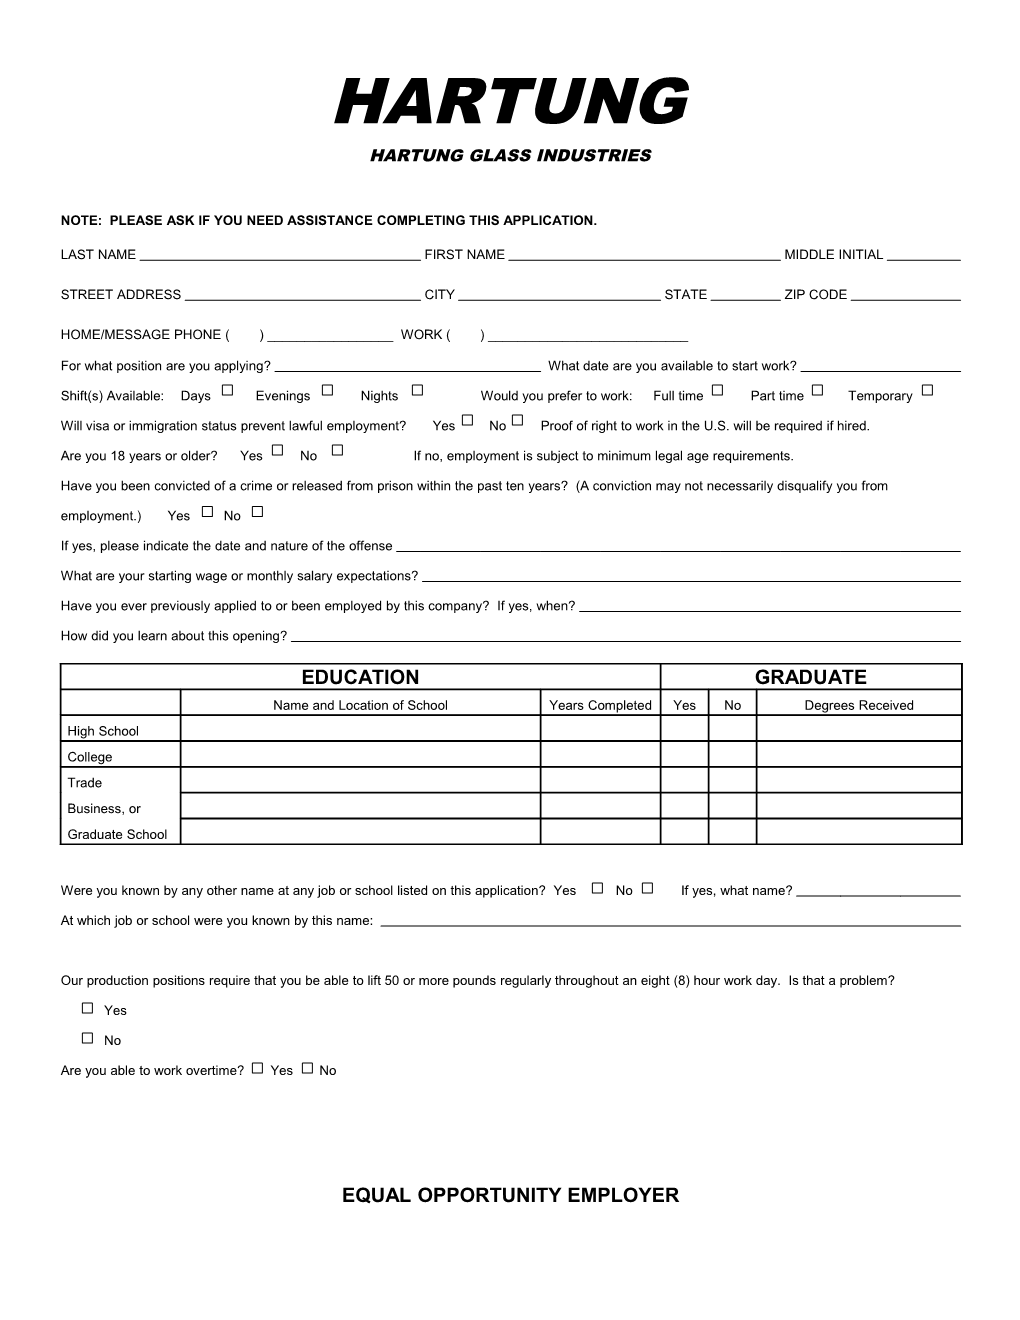 Note: Please Ask If You Need Assistance Completing This Application